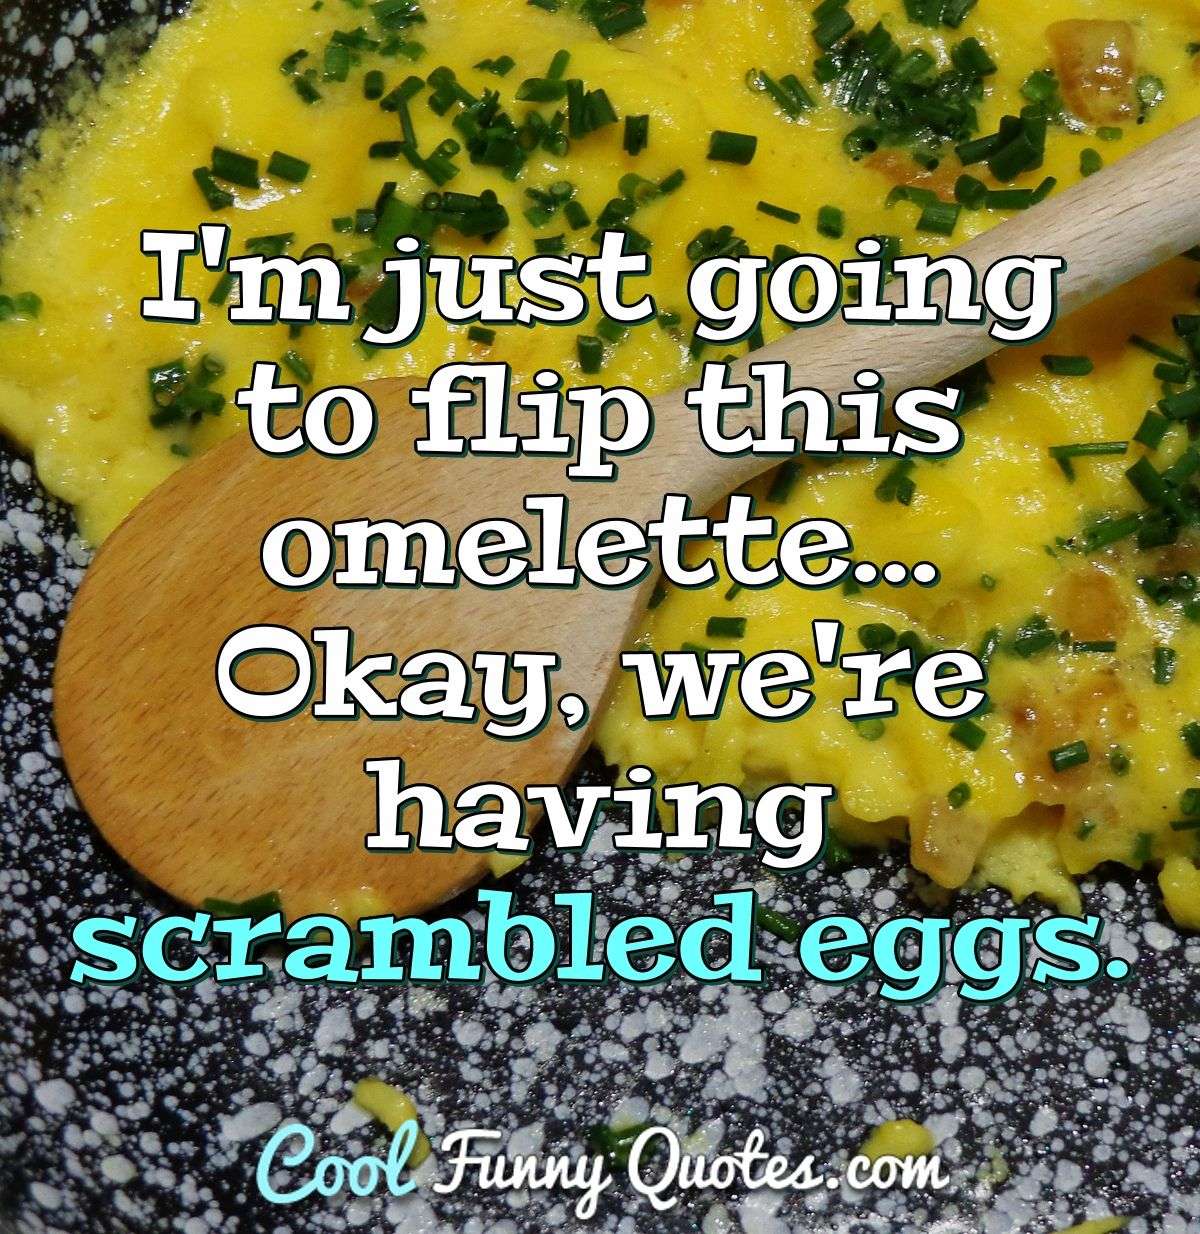 I'm just going to flip this omelette... Okay, we're having scrambled eggs. - Anonymous